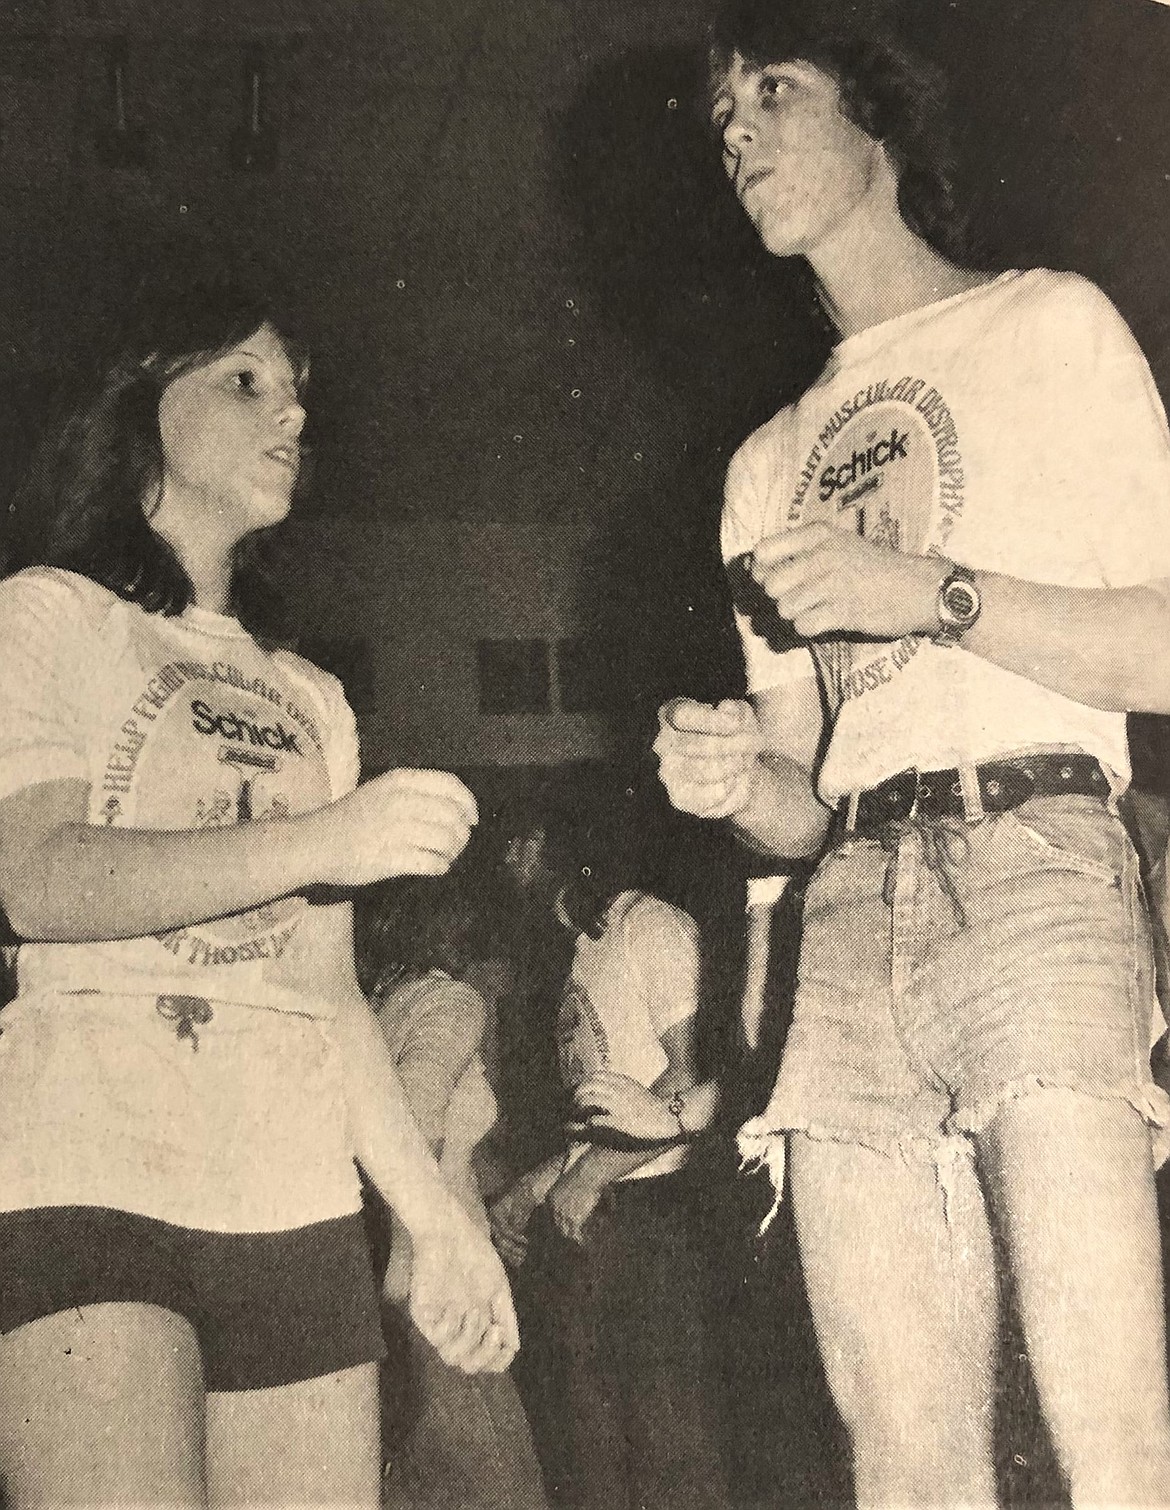 CHS students Gary Webb and Vicki Yount won the February 1978 dance marathon at the old North Shore.